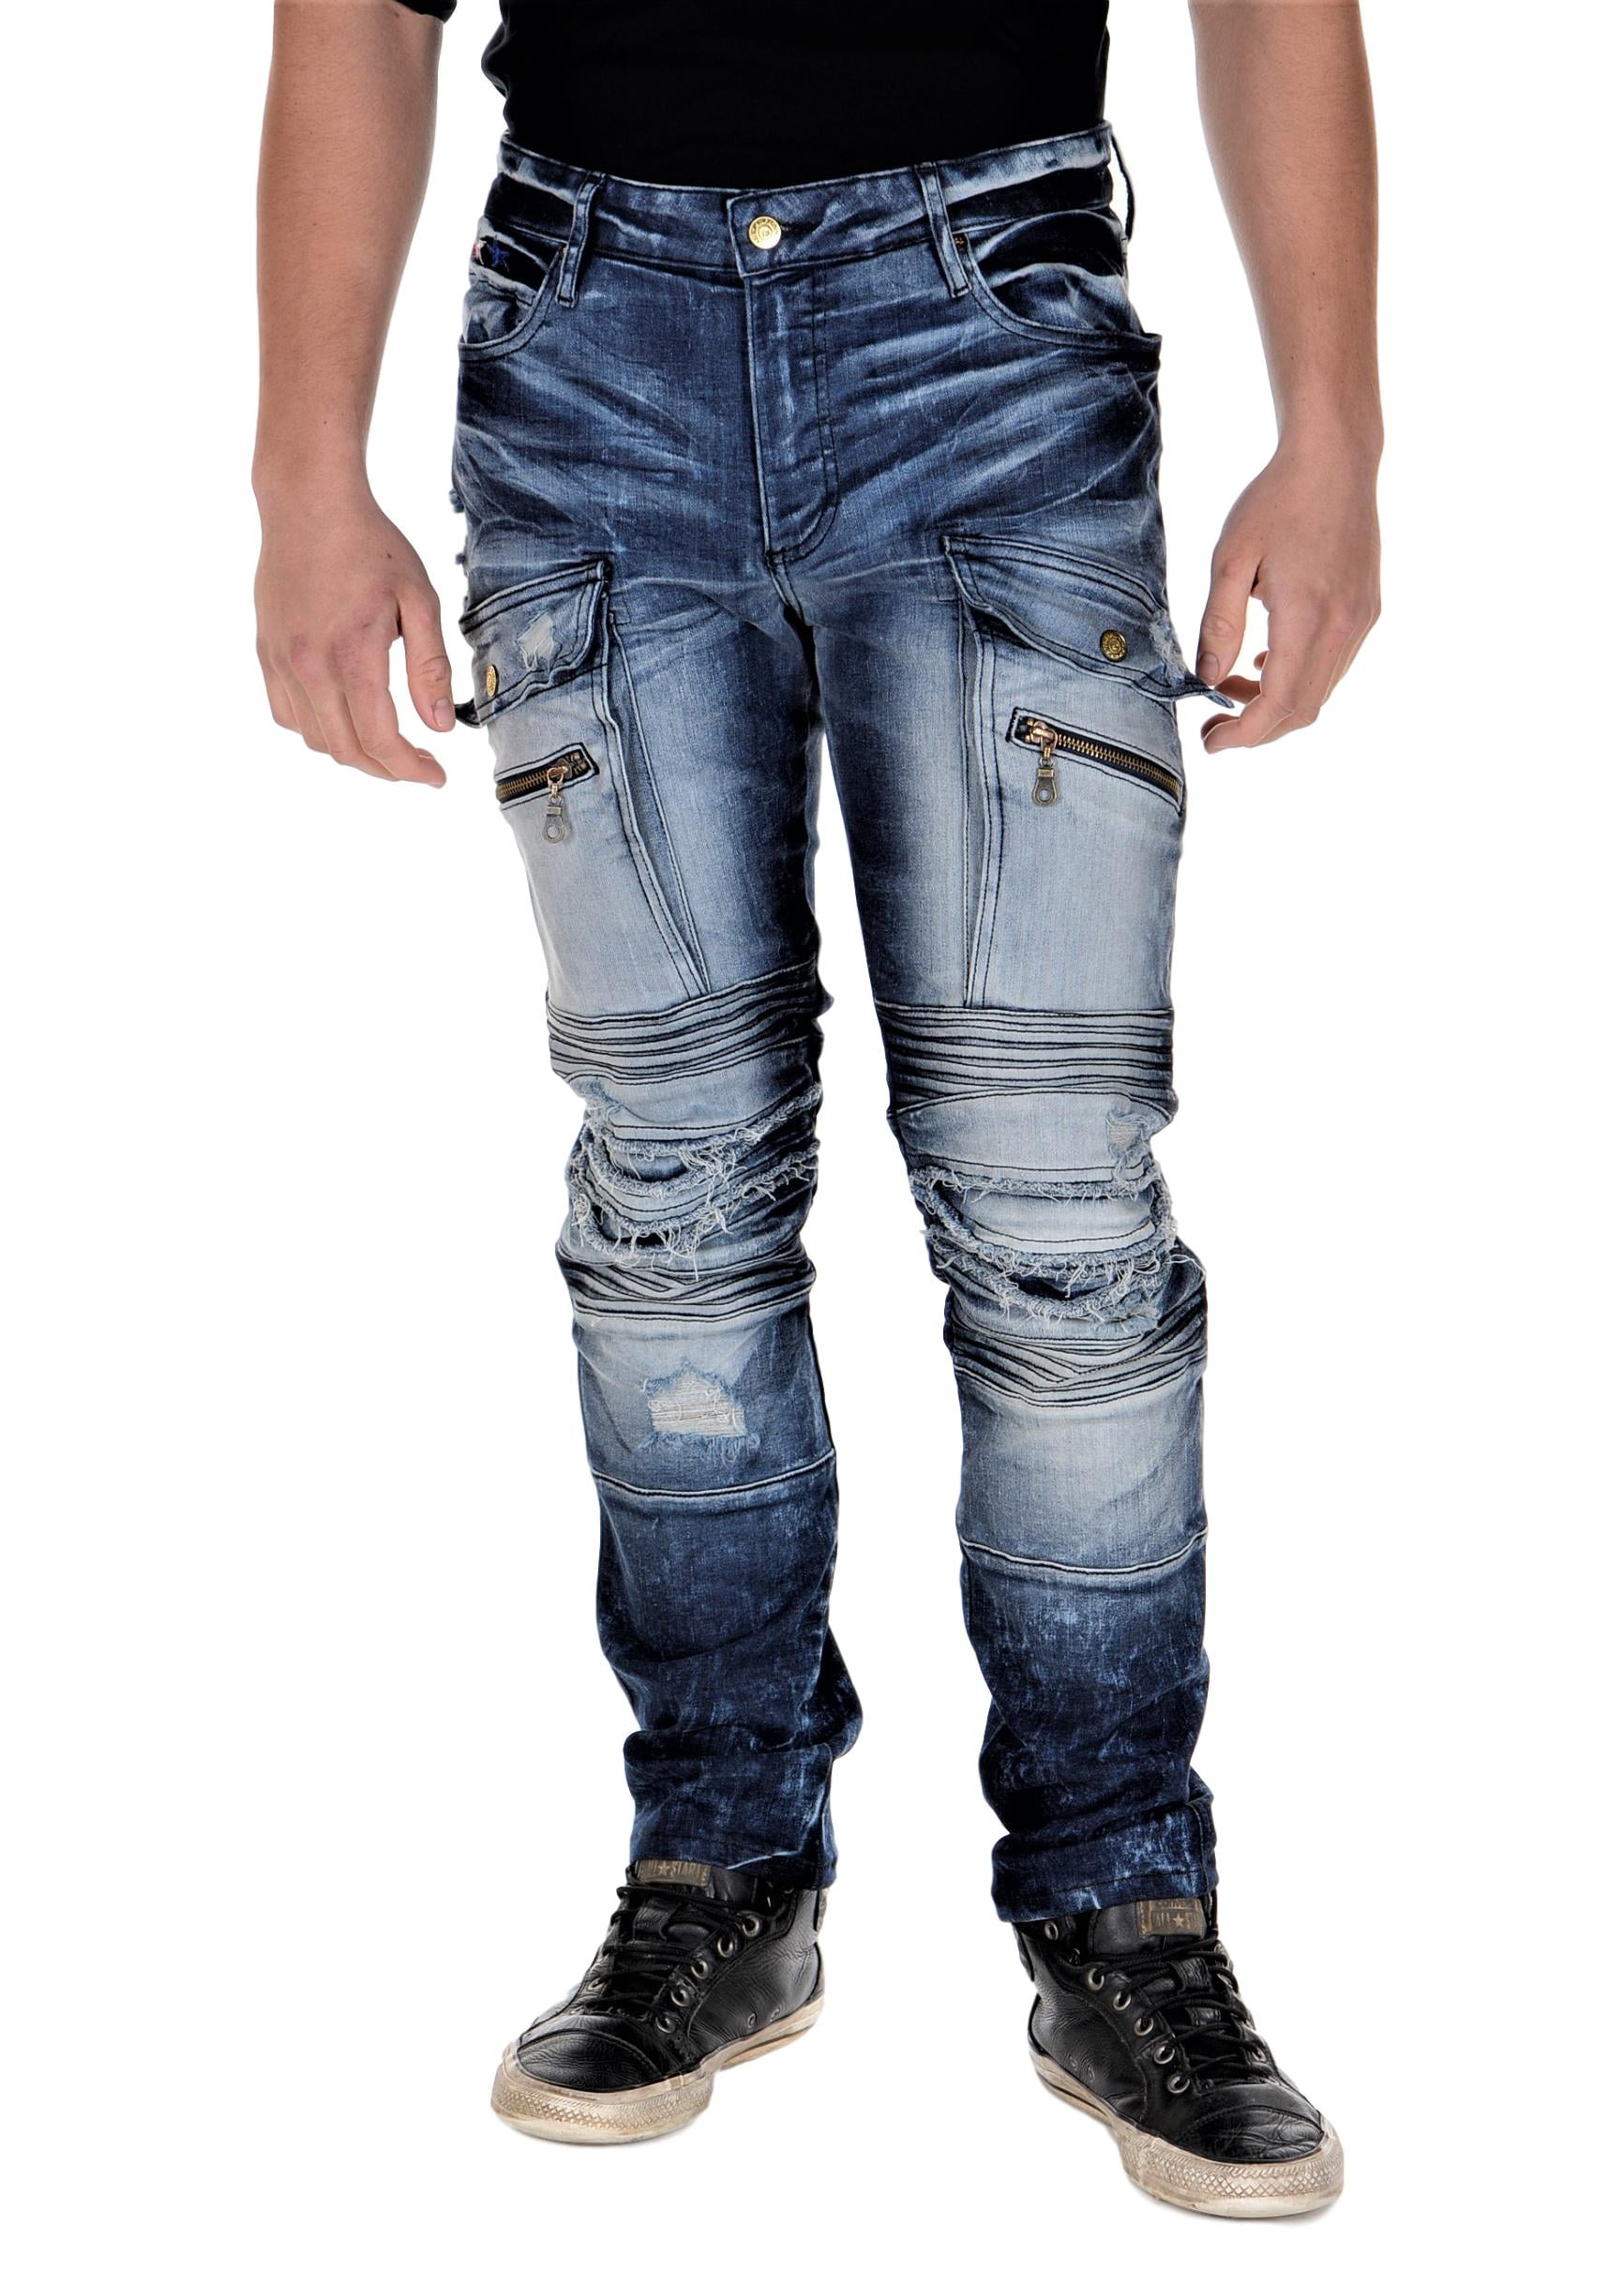 red robin's jeans